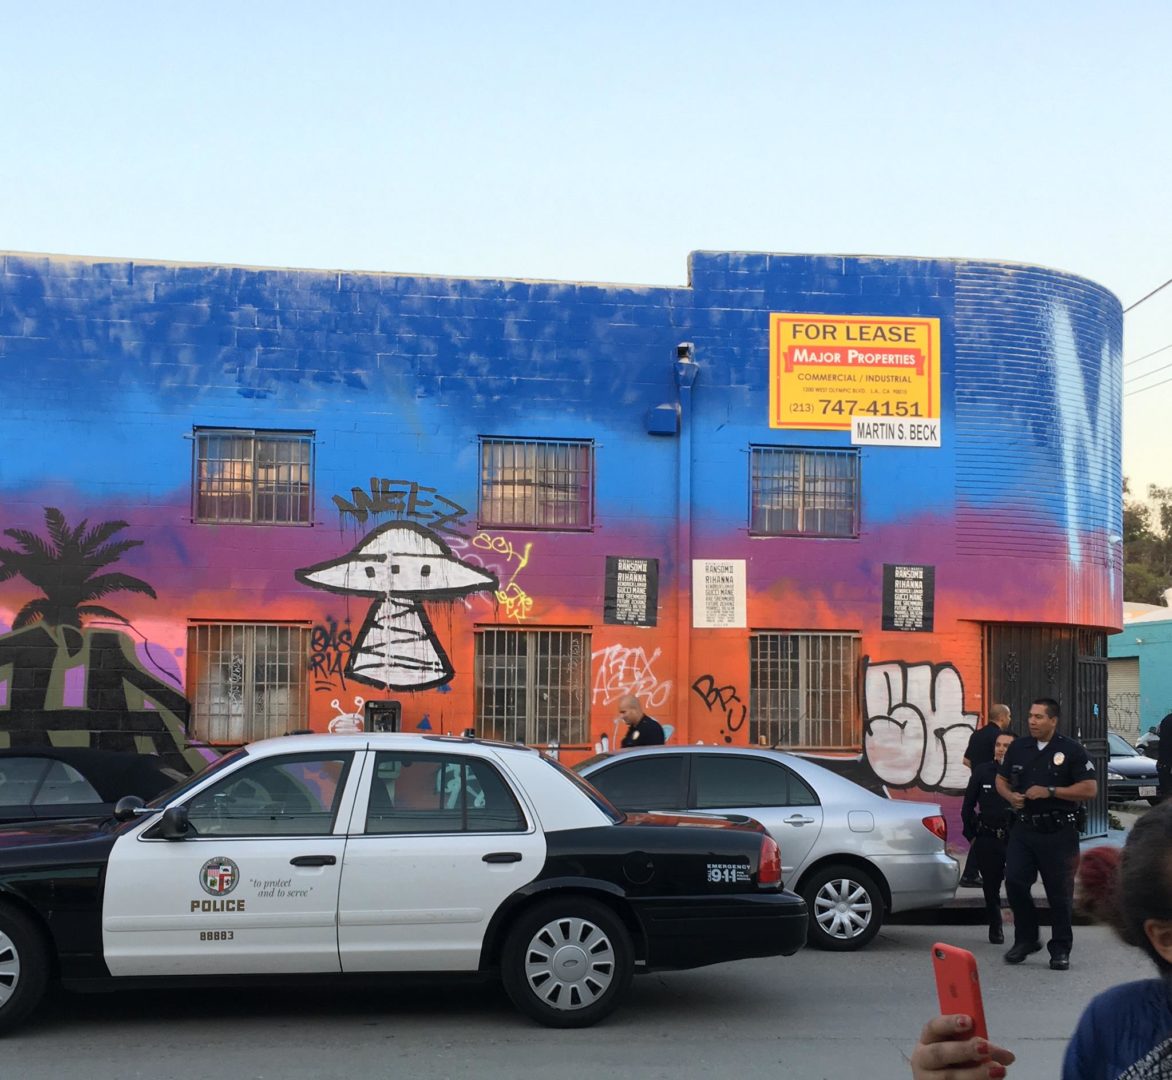 LAPD is called on residents picketing outside MaRS art gallery in Boyle Heights in 2018